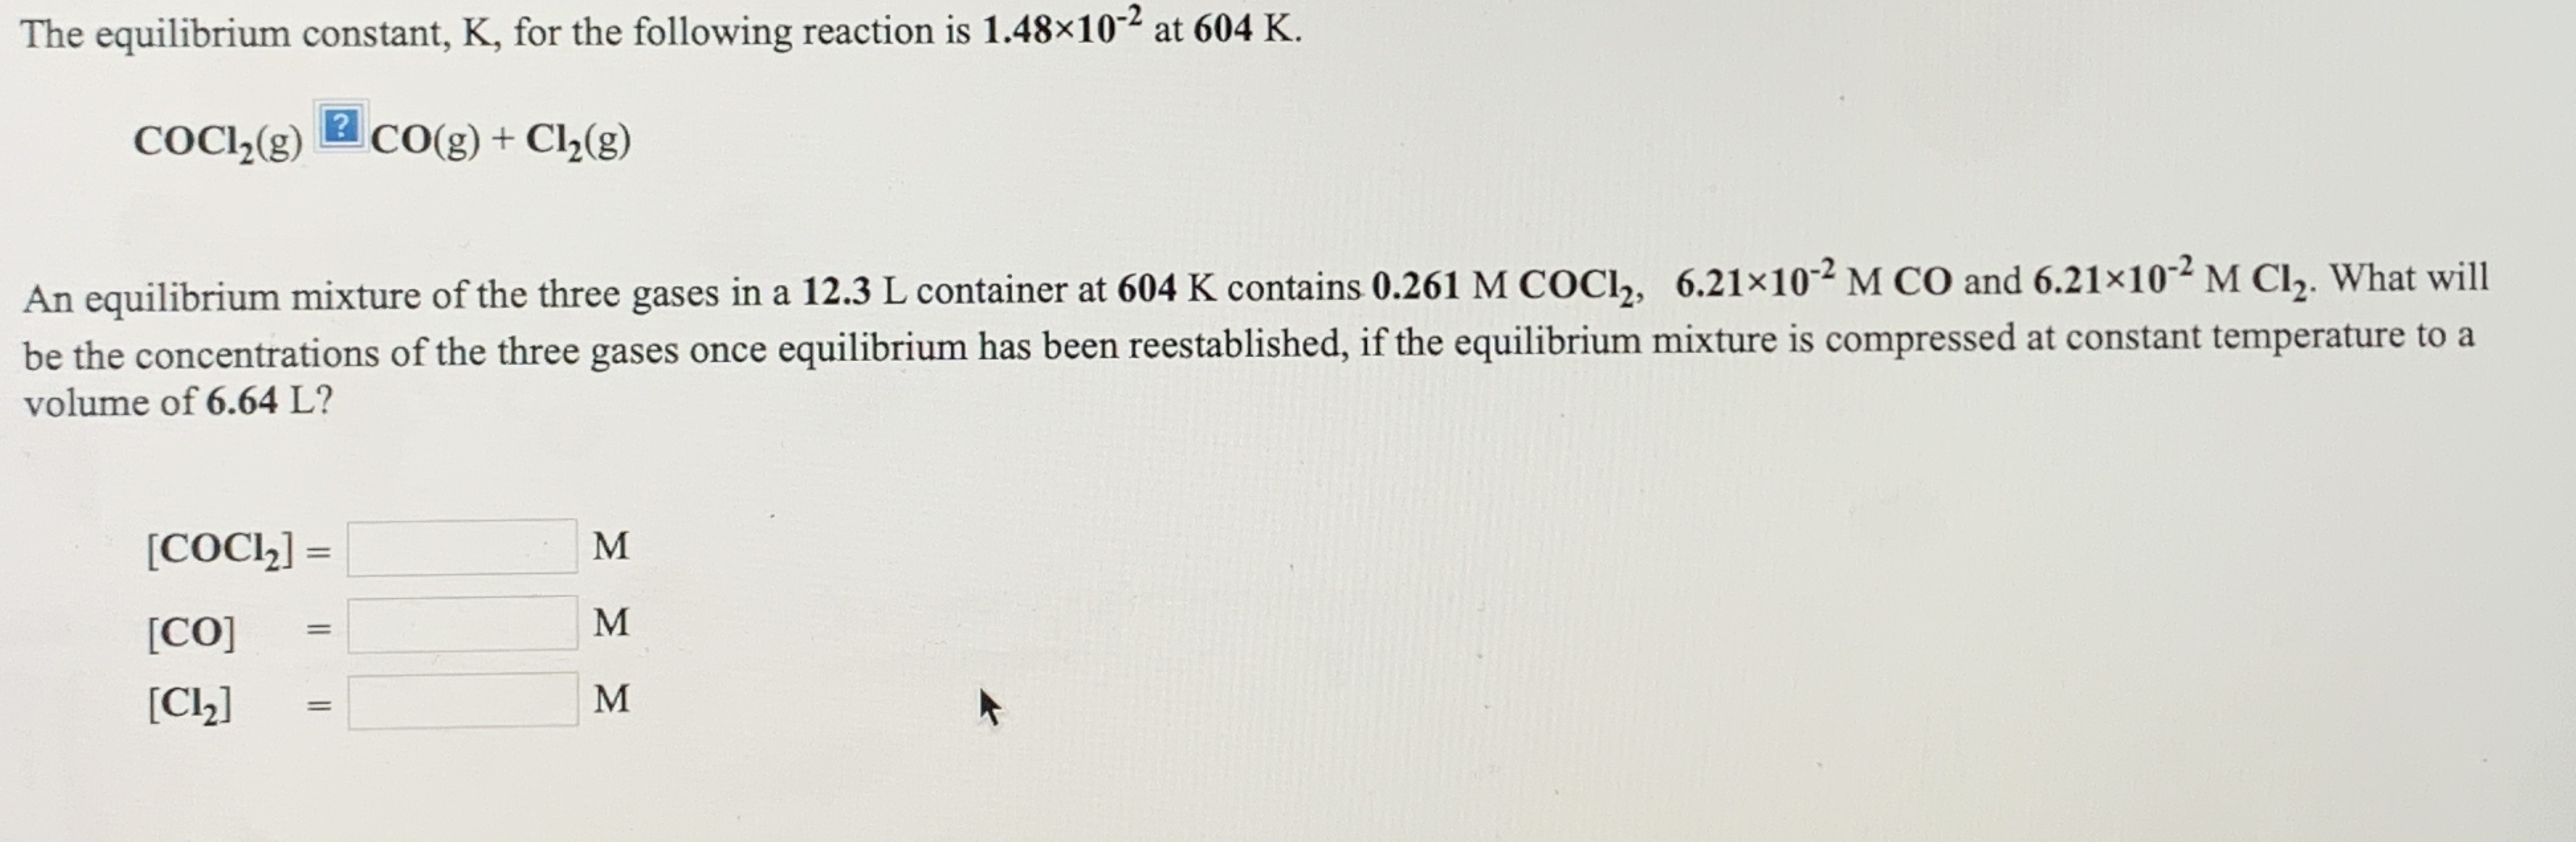 The equilibrium constant, K, for the following reaction is 1.48x10-2 at 604 K.
COCI(g) 2 cO(g) + Cl½(g)
An equilibrium mixture of the three gases in a 12.3 L container at 604 K contains 0.261 M COCI,, 6.21×10-² M CO and 6.21×10-² M Cl,. What will
be the concentrations of the three gases once equilibrium has been reestablished, if the equilibrium mixture is compressed at constant temperature to a
volume of 6.64 L?
[COCl,] =
M
%3D
[CO]
%3D
M
[CL]
